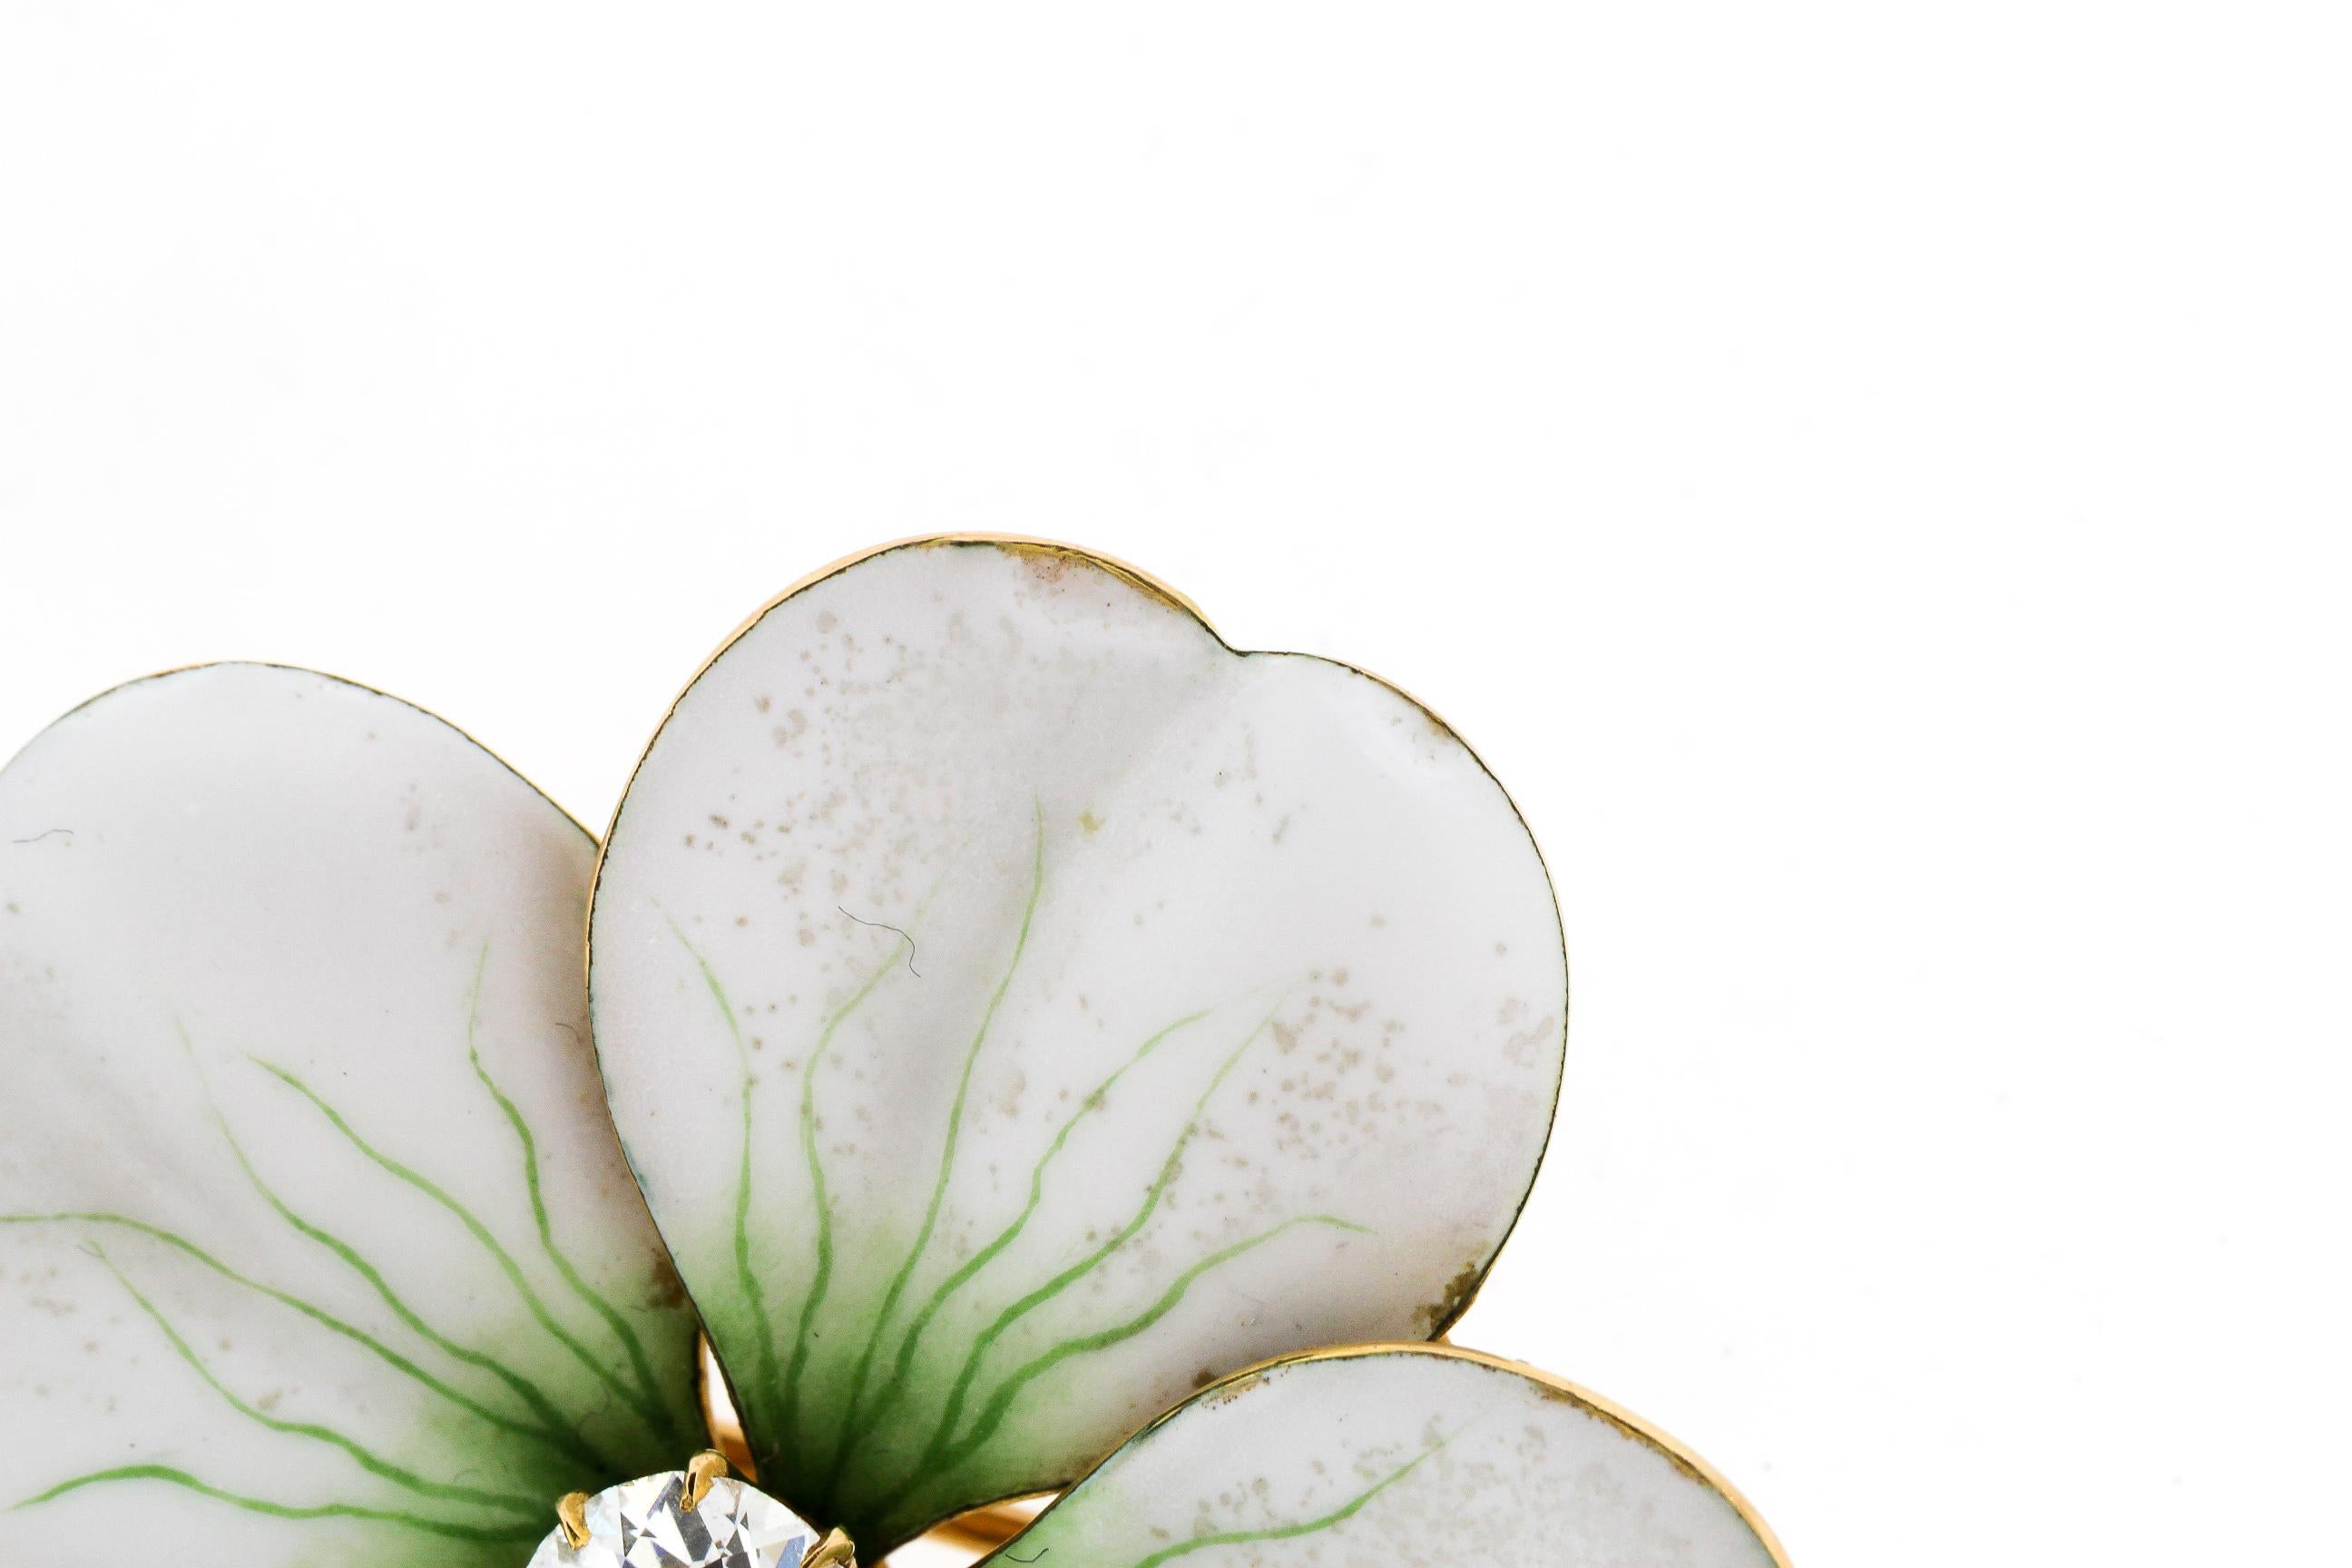 Antique Art Nouveau 18k gold white enamel flower pin set with an Old European cut diamond, circa 1900. The bold white petals has green enamel details creating the realistic quality of the flower. There is a small gold stem at the bottom of the